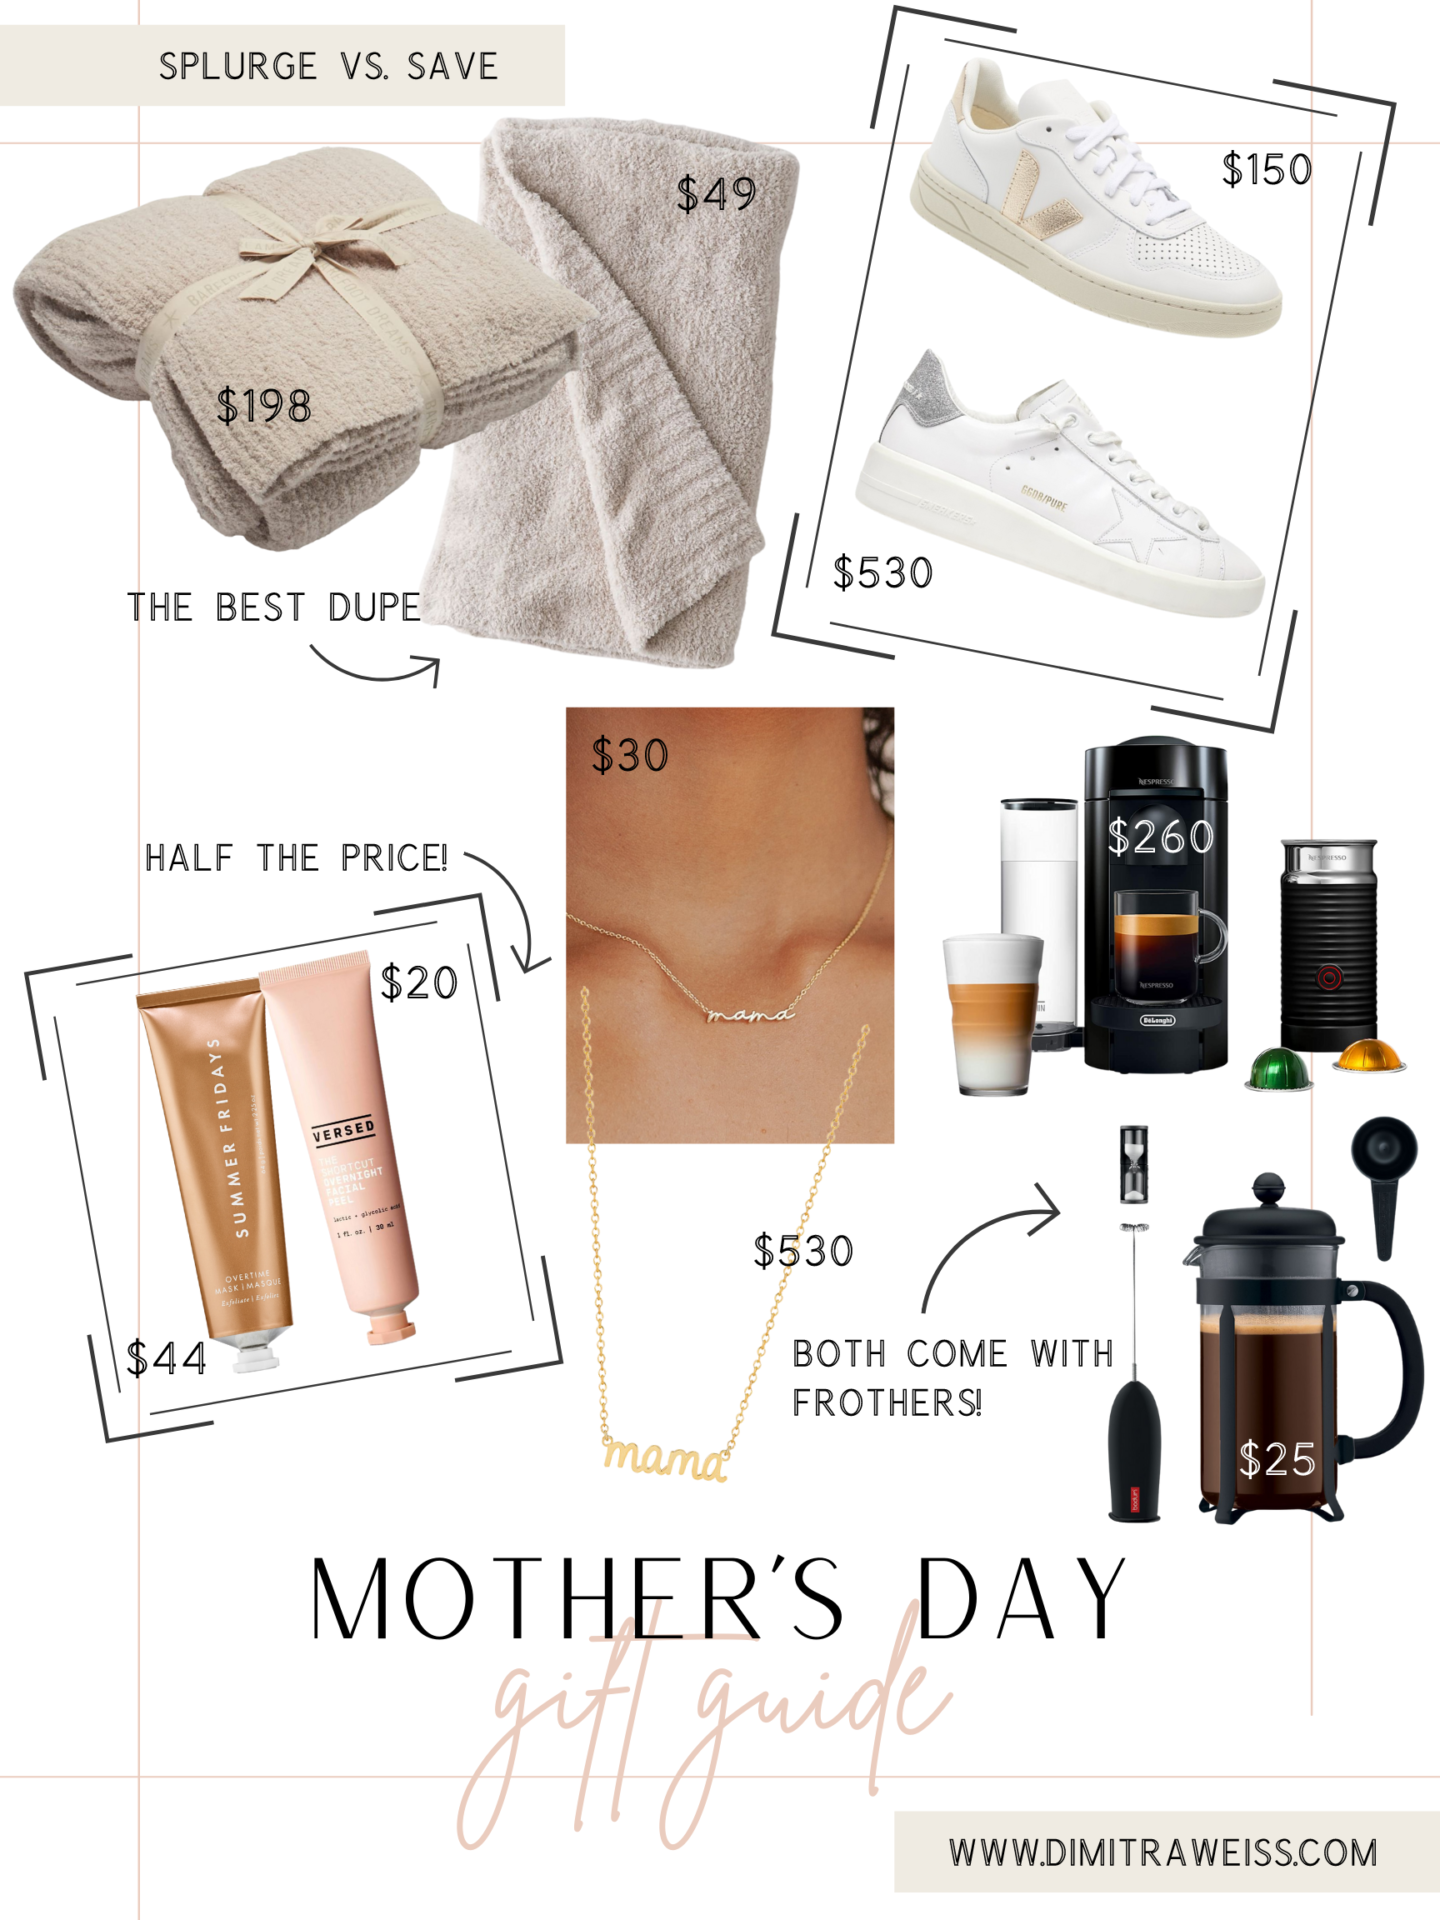 https://dimitraweiss.com/wp-content/uploads/2021/05/mothers-day-gift-guides-2-1440x1920.png